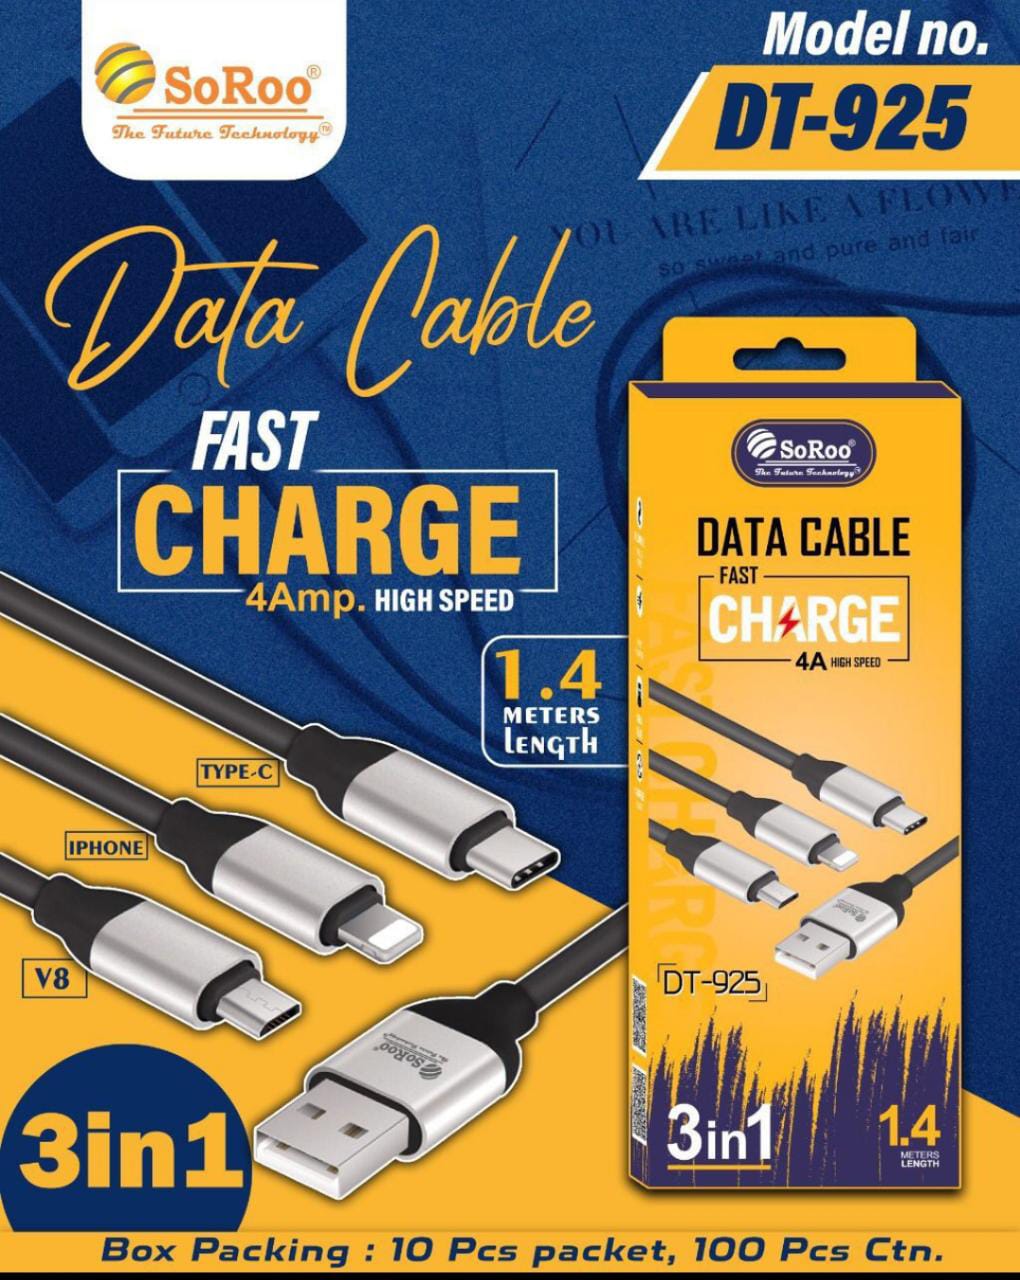 Soroo Mobile Data Cable 3 in 1